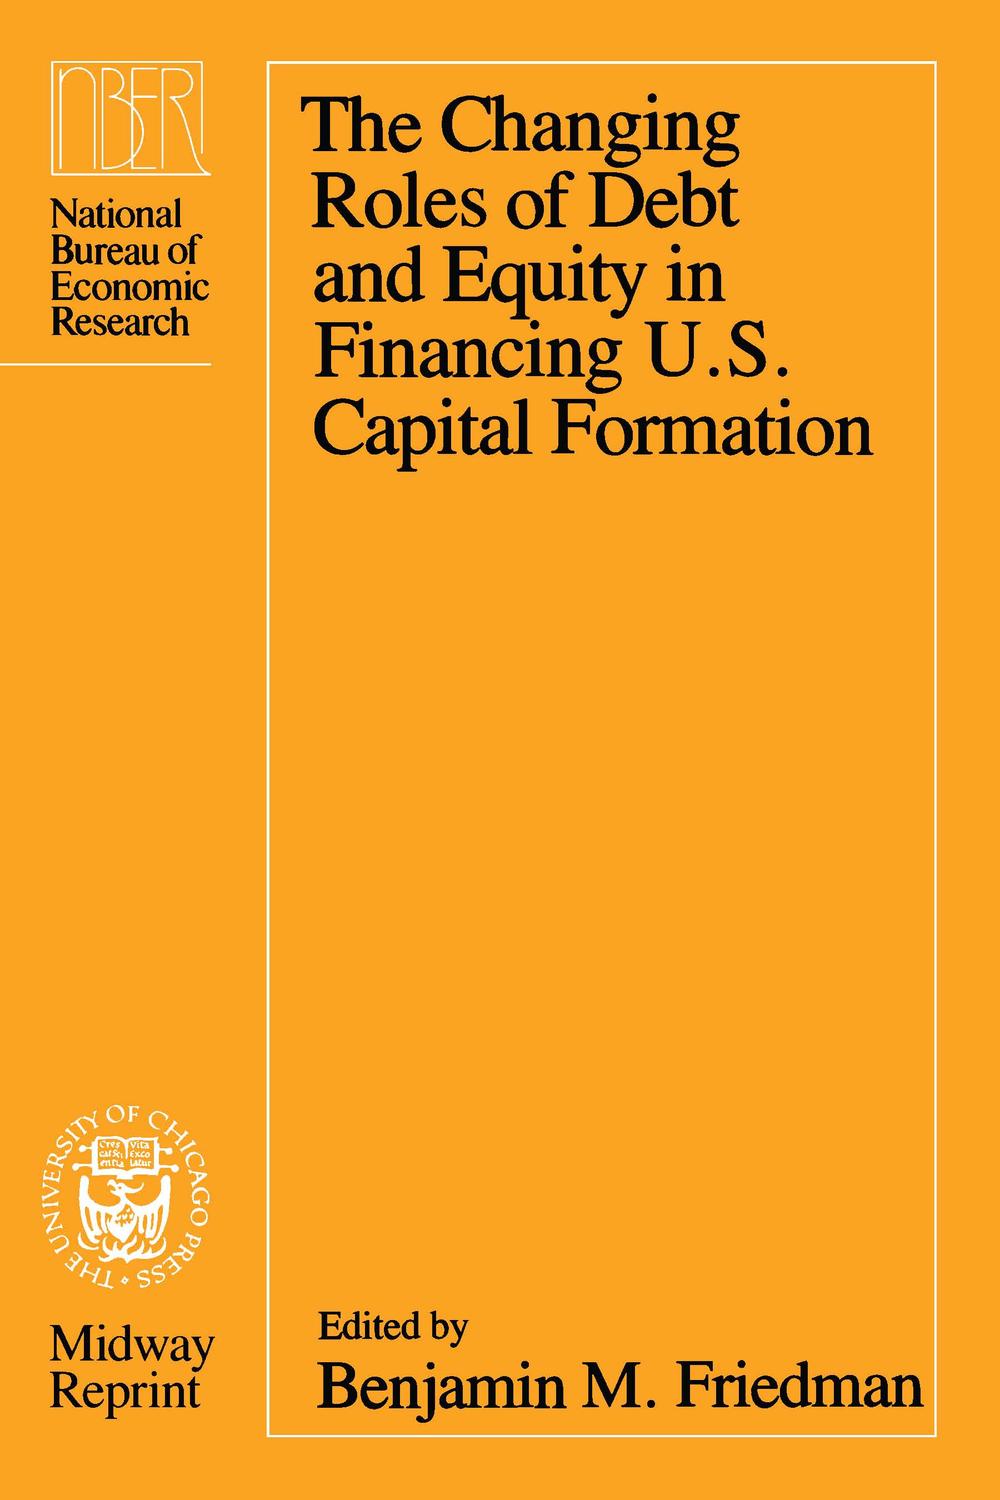 The Changing Roles of Debt and Equity in Financing U.S. Capital Formation - Benjamin M. Friedman